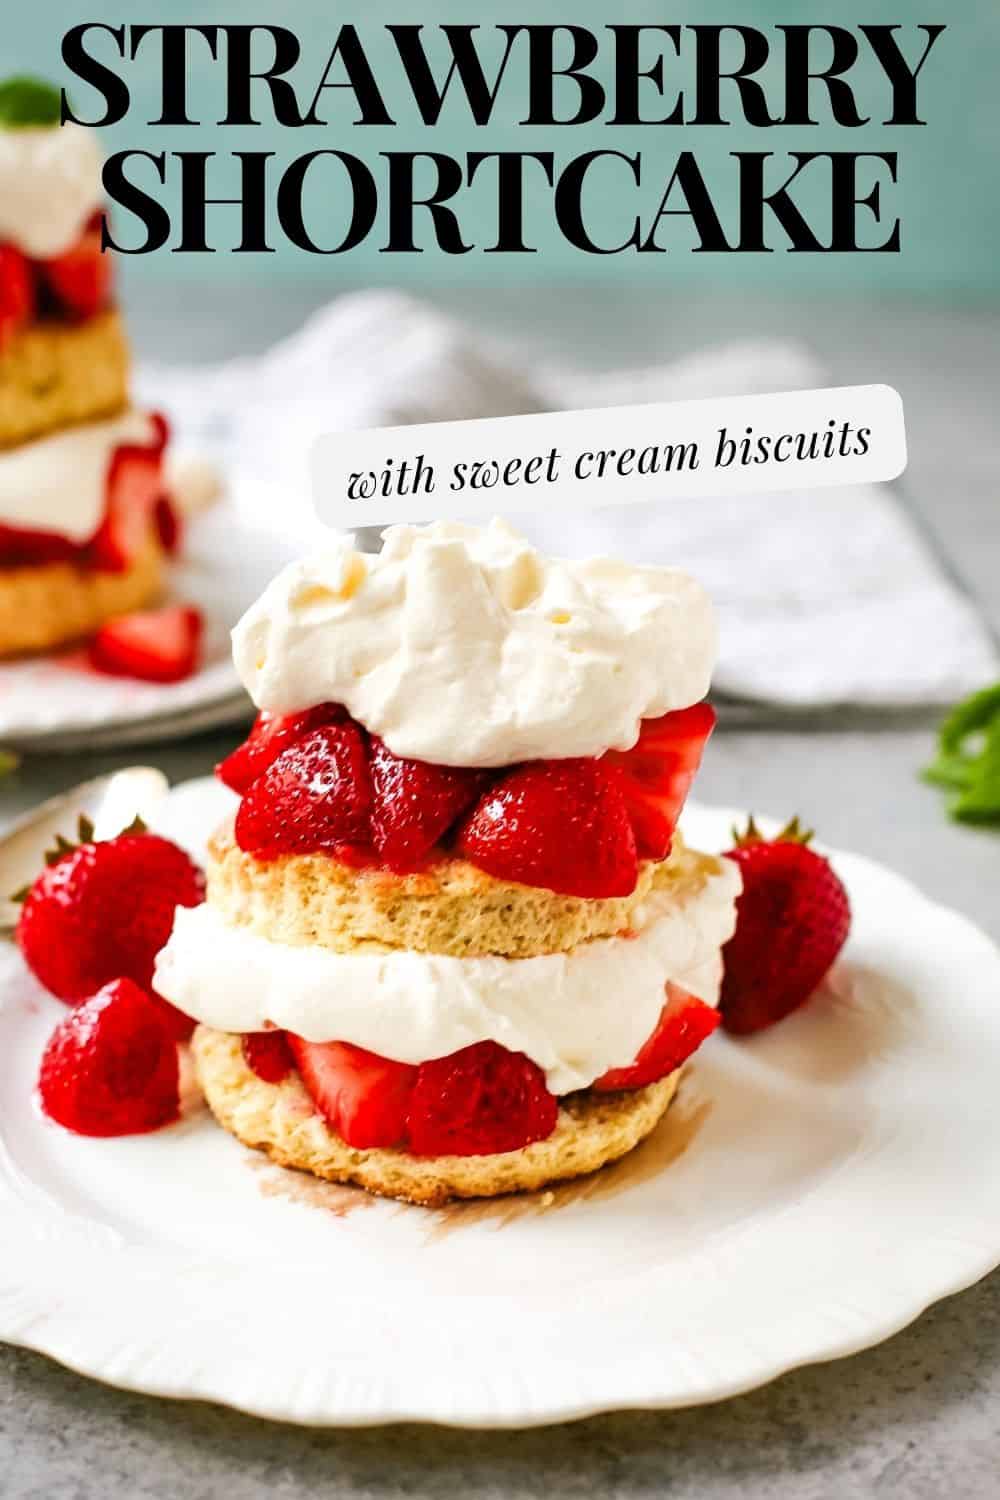 The Best Strawberry Shortcake with Homemade Sweet Biscuits, Sliced Strawberries, and Sweetened Whipped Cream. The sweet biscuits paired with sugared, syrupy strawberries, and fluffy whipped cream.